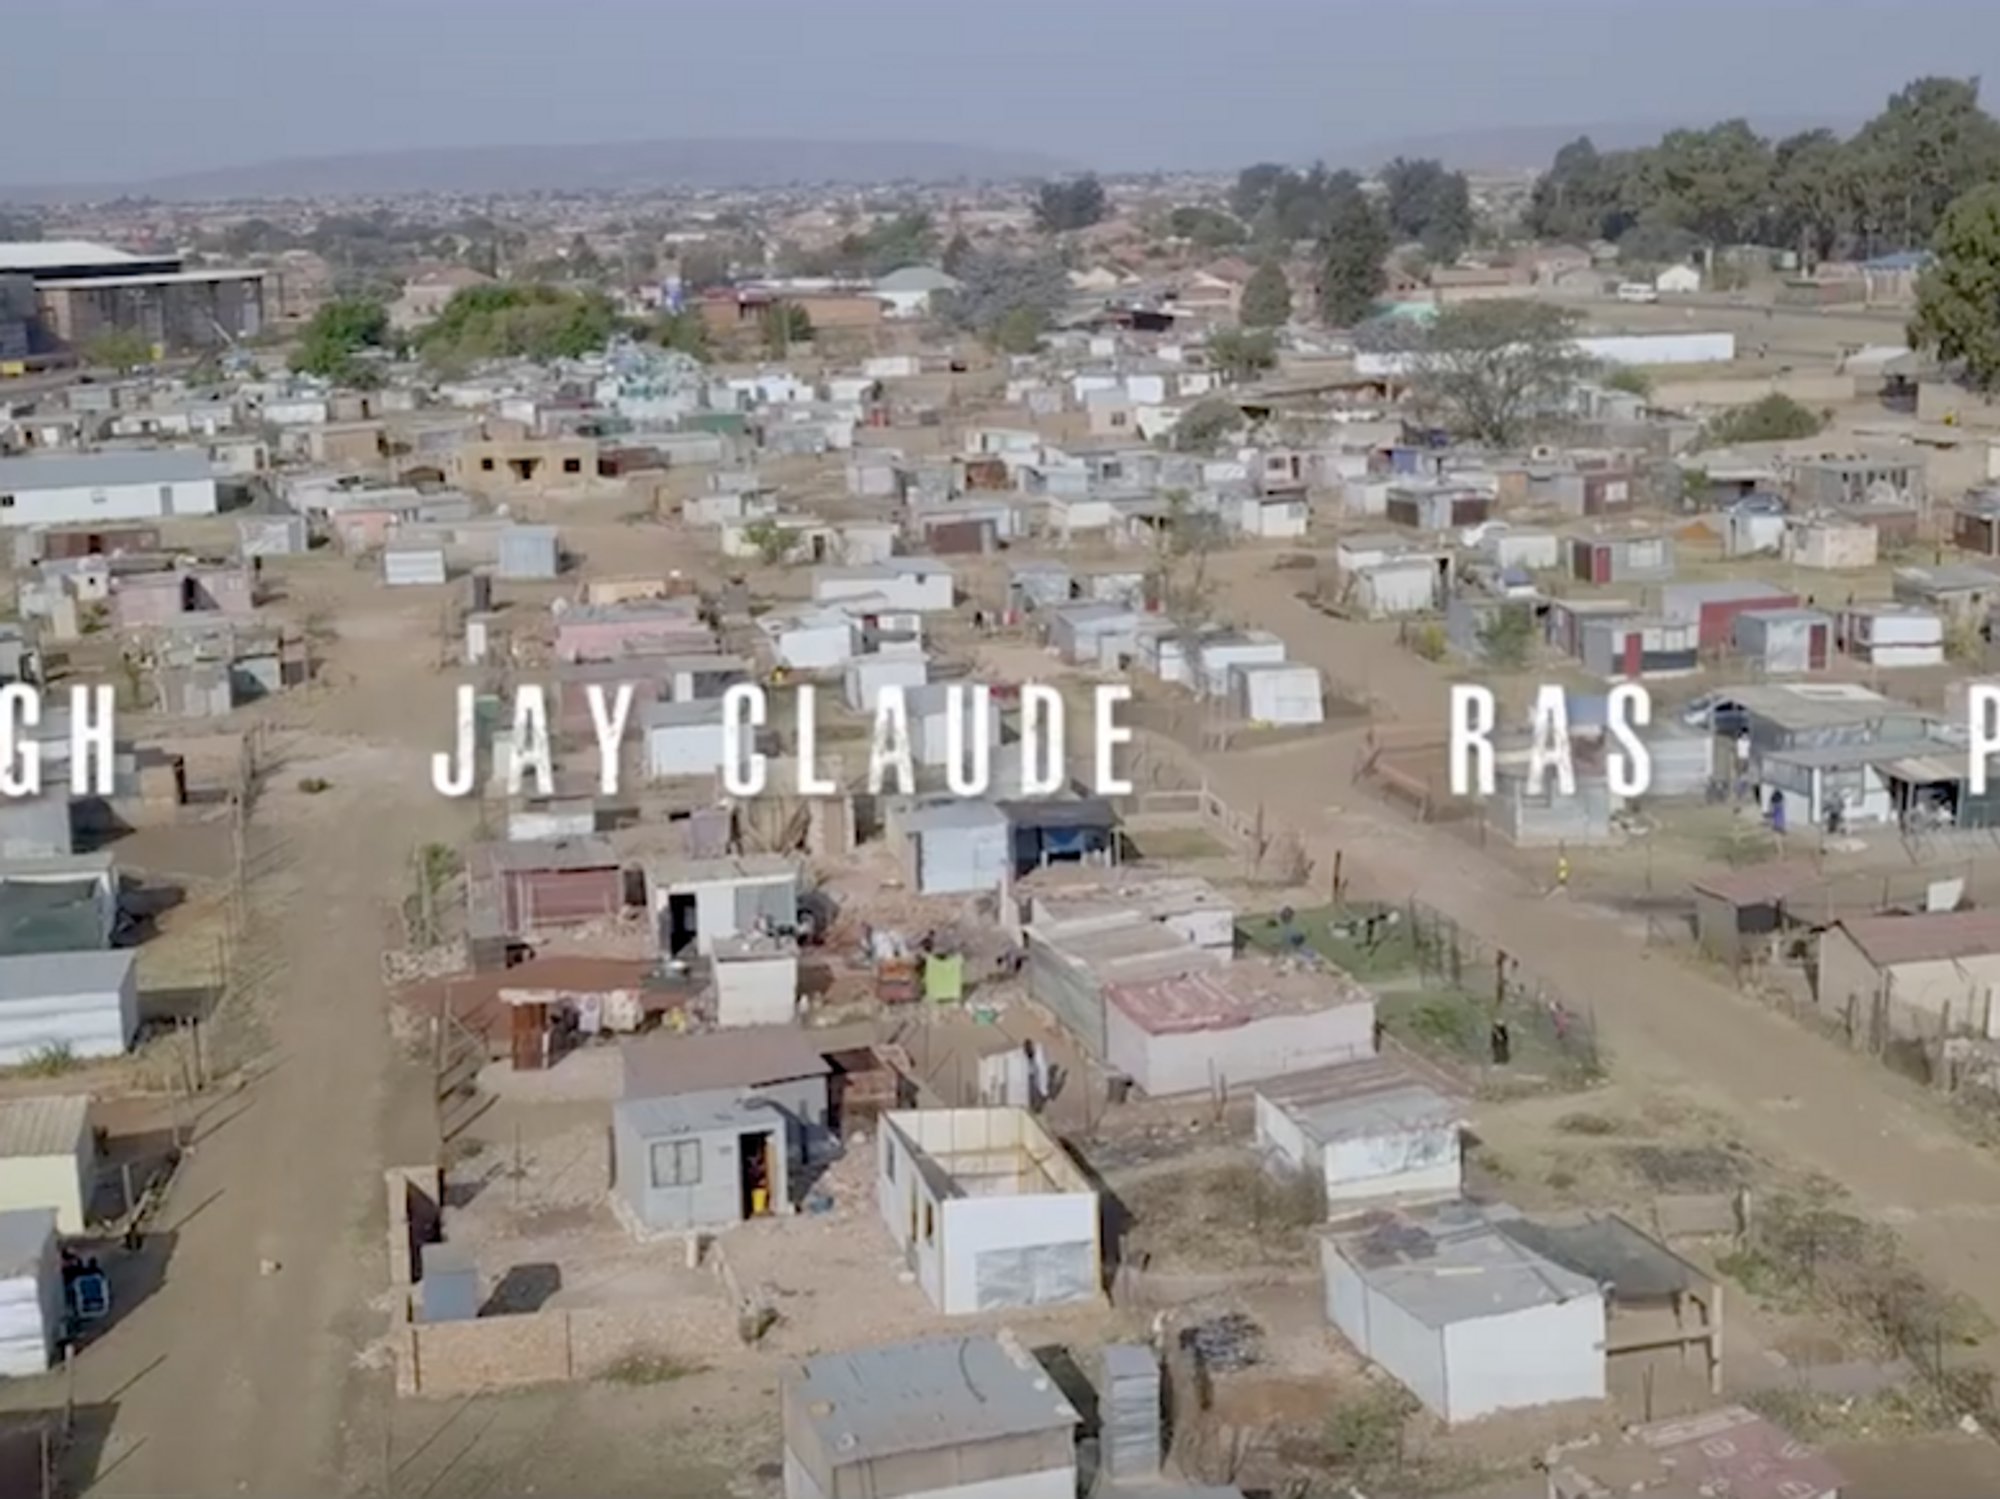 Watch the Music Video for ‘Top 5’ by Ras, N’Veight, PdotO and Jay Claude